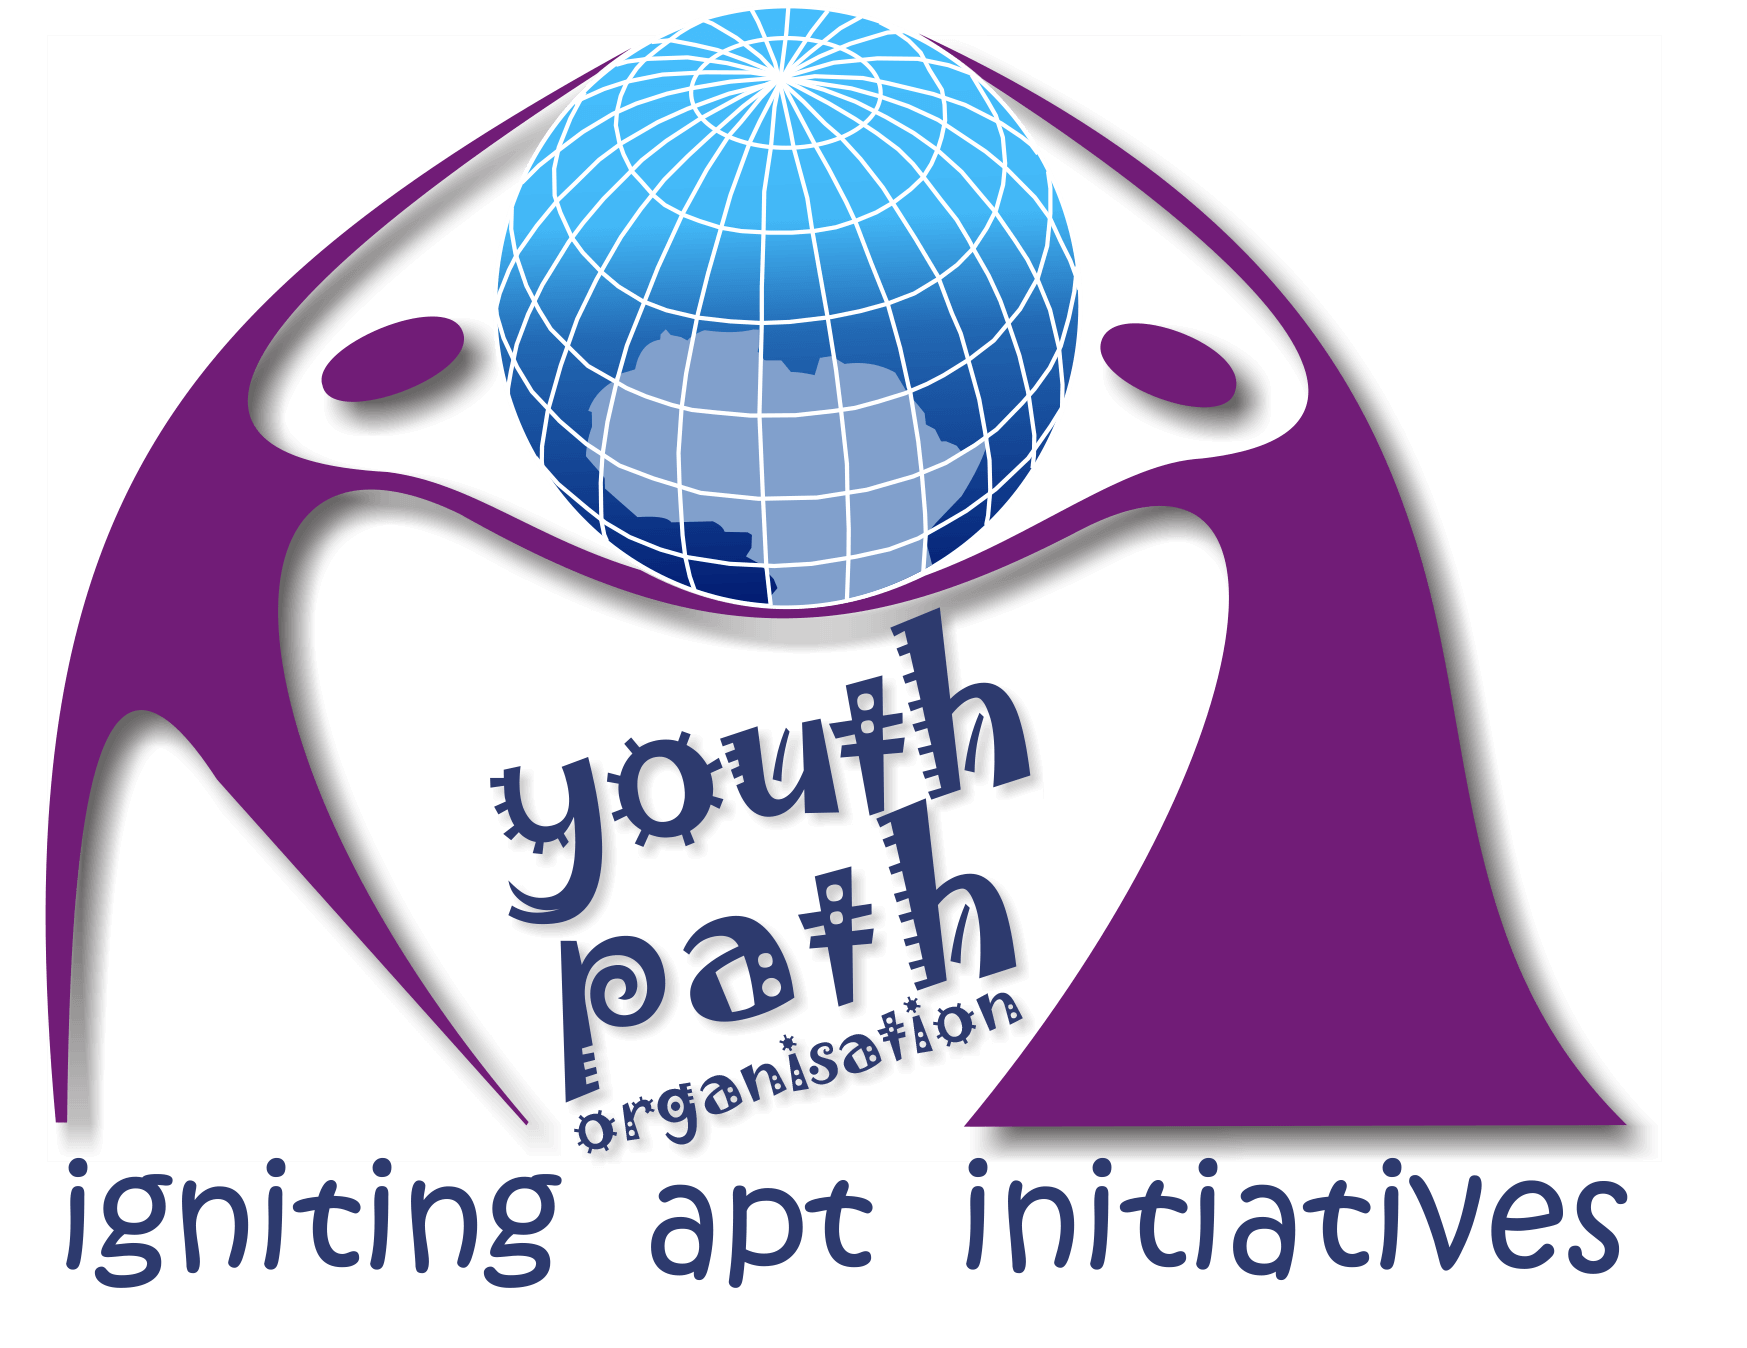 Youth Path - Igniting apt initiatives